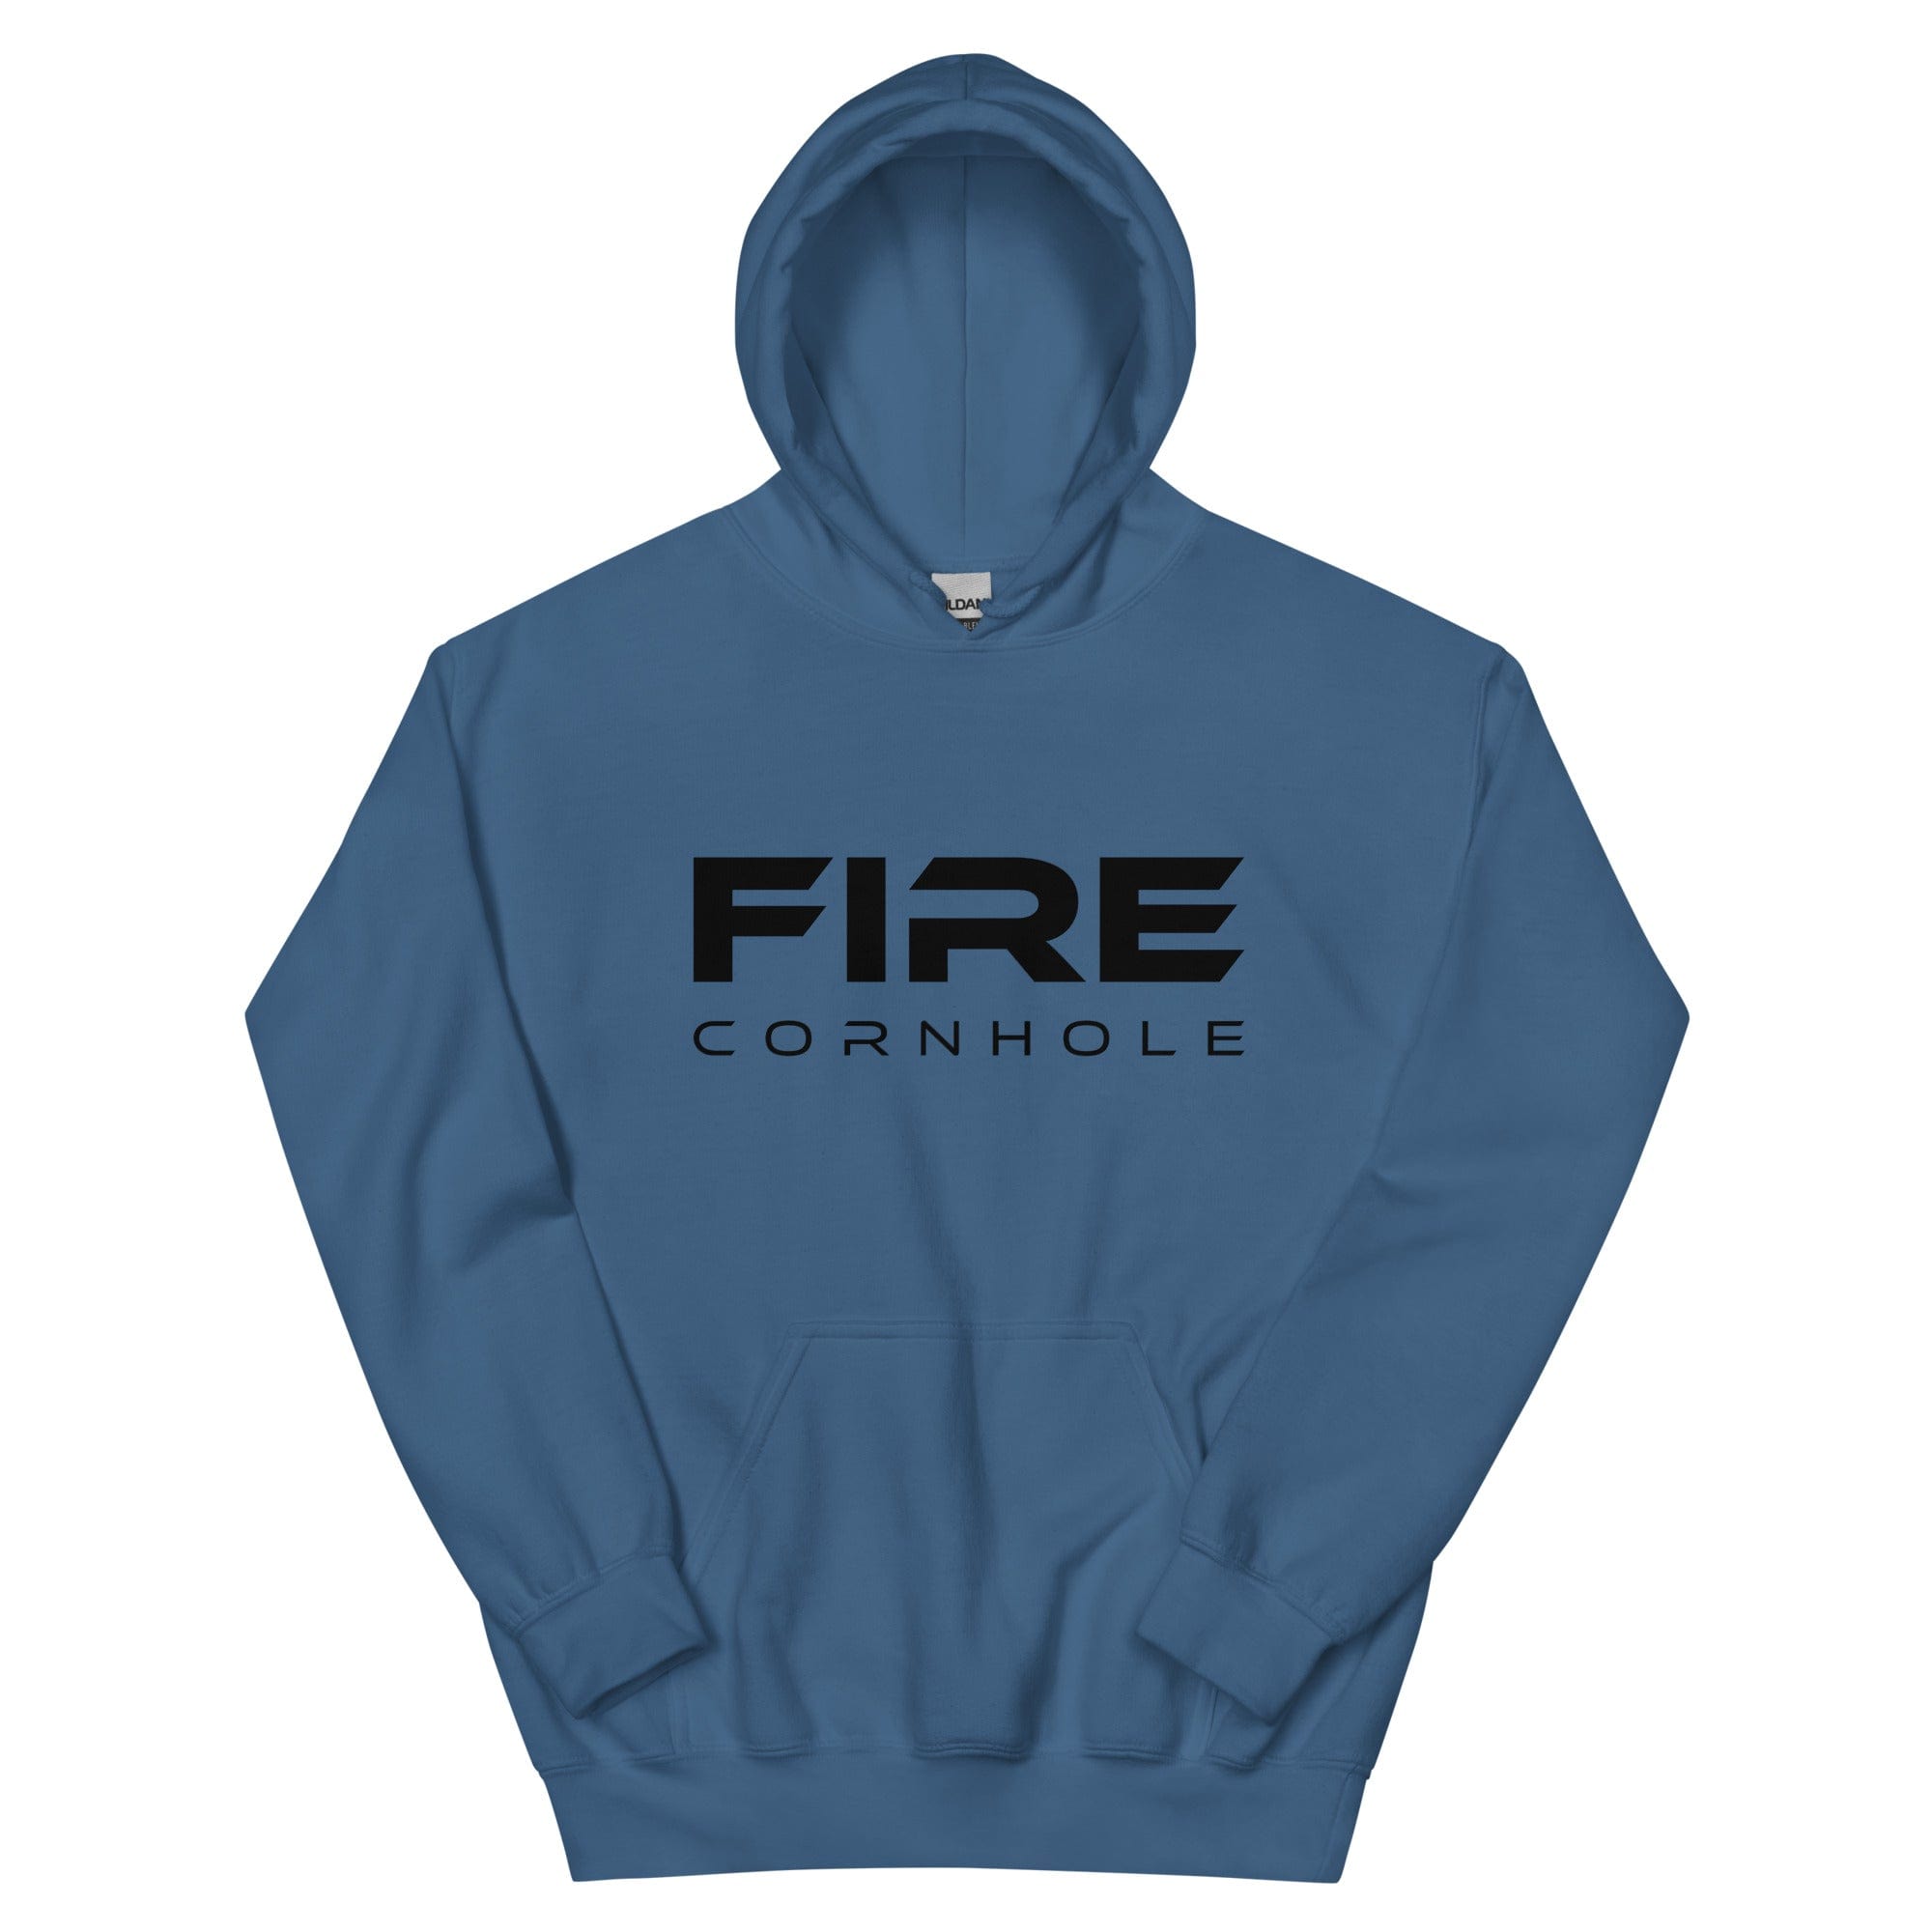 Teal unisex cotton hoodie with Fire Cornhole logo in black